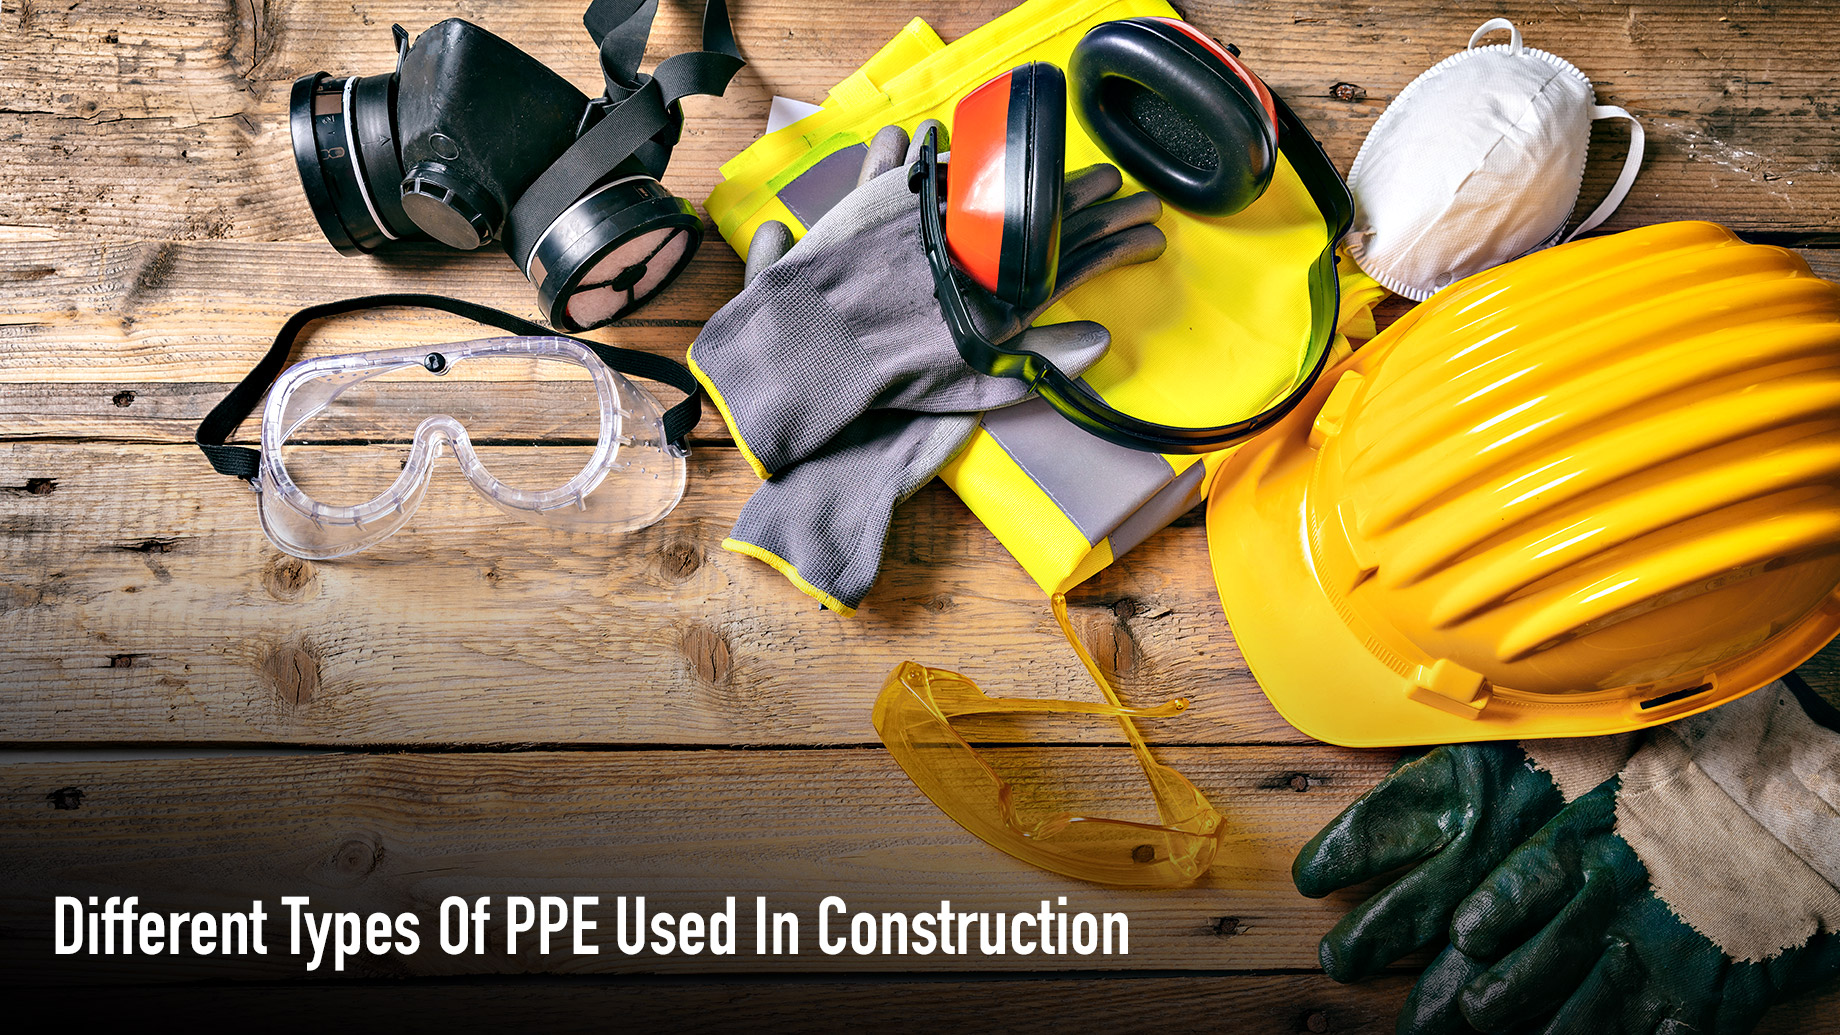 Different Types Of PPE Used In Construction - What You Need To Know